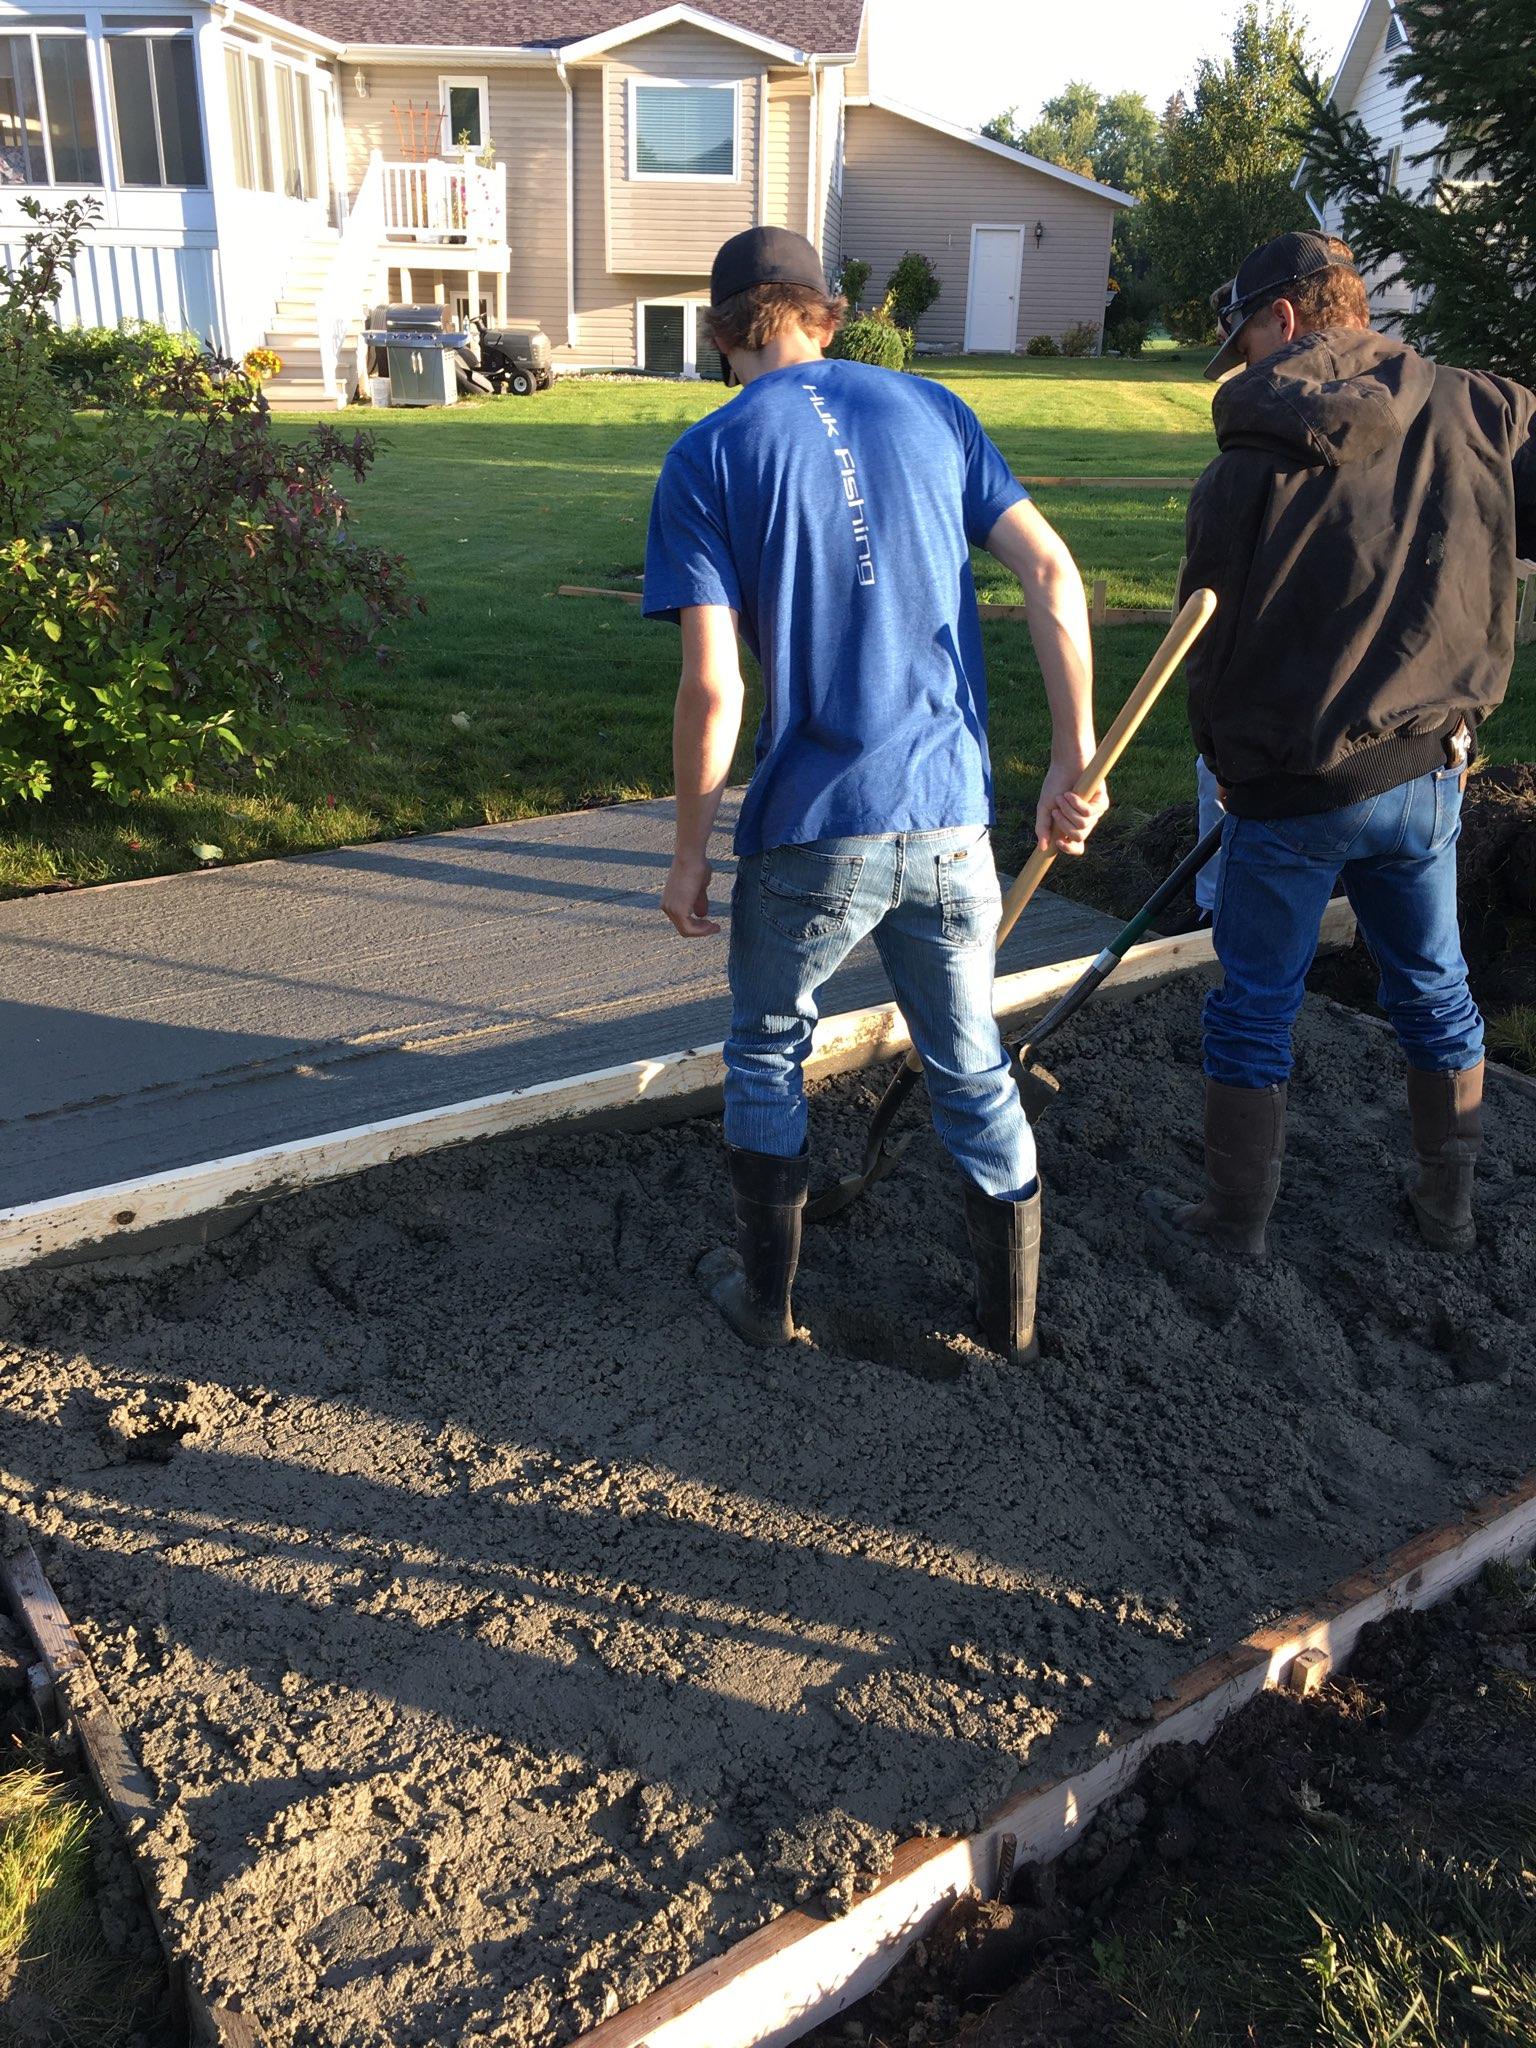 Students leveling an area of concrete.